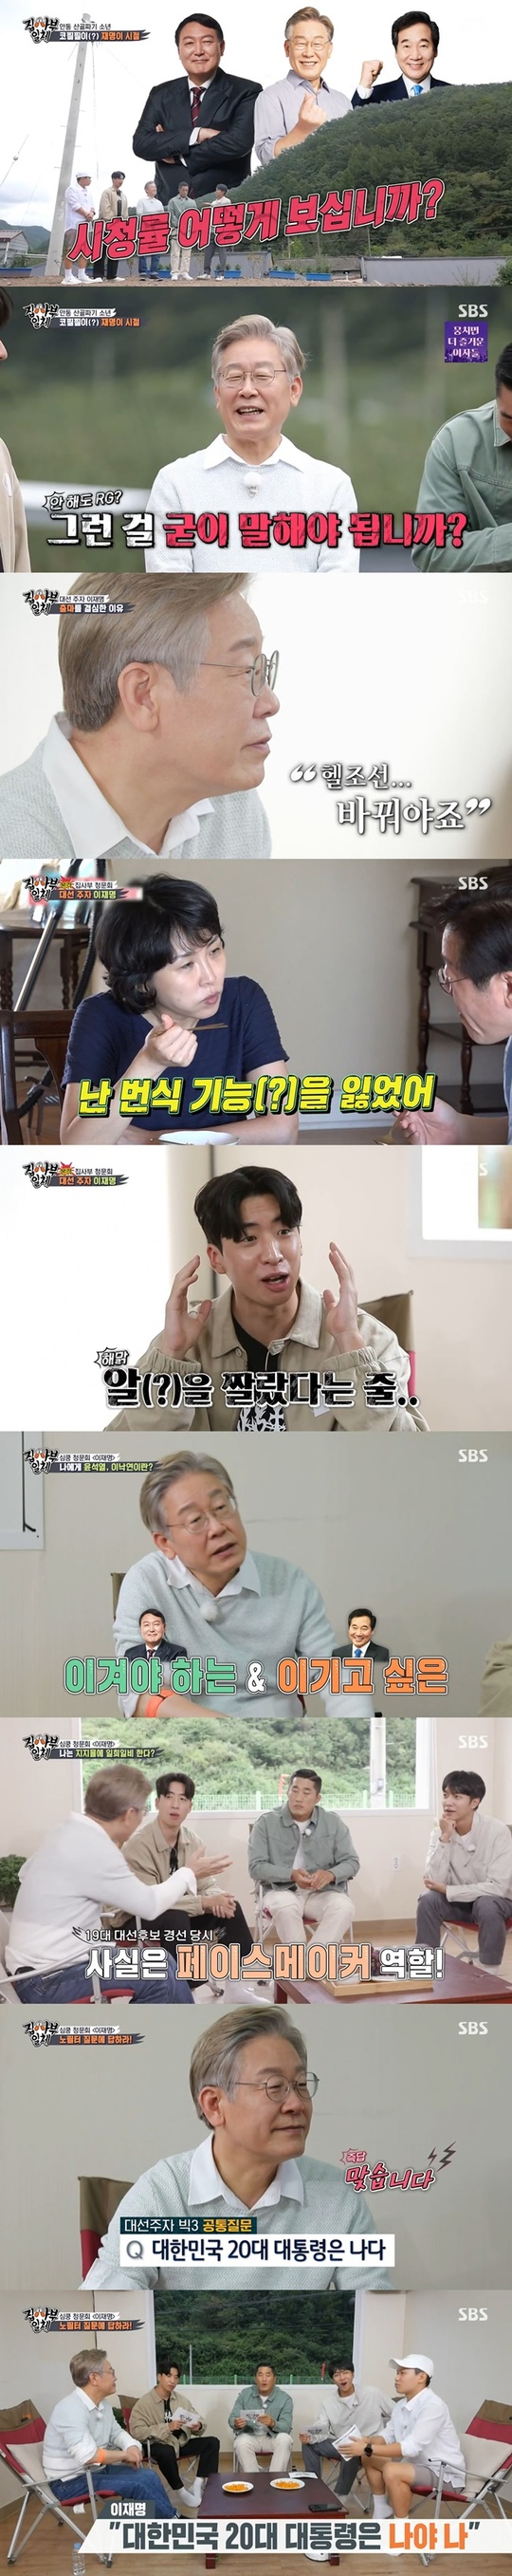 Lee Jae-myung reveals the occasion when he appeared on All The ButlersOn September 26, SBS All The Butlers was featured in the Fortress Big 3 special feature and Lee Jae-myung, the governor of Gyeonggi Province, appeared.On this day, Yang Se-hyeong mentioned Lee Jae-myung in the short interview of Yang Se-hyeong and said, I know you can put it down a little.He does everything he can to make you comfortable. But its just not that fun. Lee Jae-myung responded, Mr. Se-hyung was not funny.Lee Jae-myung called his disciples to Andong Station, not Gyeonggi Province, and Lee Jae-myung said, Yesterday I went to Gangwon Province and tomorrow I go to Daegu.I came to Andong Station on a schedule issue, he said. My parents grave is near here. This is the place I lived in.I lived here until I was 13 years old before I moved to Seongnam. Lee Seung-gi then asked, The (Lee Jae-myung) Image we know is cool and has a chicken temperament.Lee Jae-myung said, It is an opportunity to show that he is not such a person.Lee Jae-myung also talked about the difference between TV viewers ratings with For runner Lee Nak-yeon, Yoon Seok-ryul, who appeared together.I am the first of course, he said confidently.Lee Jae-myung said of the occasion when he dreamed of a For runner, Is not there anything anyone wants to do when they are young?When I went to college, I found out that there was a social structural problem, not because I could not. These days, young people call society Hell Chosun .It is not a solution that hurts more, but it seems to have given up now. I want to give hope that there is a possibility. Alongside this, gossip around Lee Jae-myung was mentioned; Lee Seung-gi, Gossip is the most of all runners?, the stone fastball question was blown.Lee Jae-myung said, There are a lot of them, 7, 8, 9, and then looked at the disciples and replied, 10? 11?Among them, deletion of breeding function among the keywords for Lee Jae-myung attracted attention.Lee Jae-myung appeared on SBS Sangmong 2-You Are My Destiny with his wife Kim Hye-kyung and said, I dont know how much I fit you.I lost my breeding function. Lee Jae-myung said, I cut it. I cut it. I tied it. But Yoo Su-bin said, Cut it?I cut the egg (?), he replied, making the scene into a laughing sea.Lee Jae-myung held a heartbeat hearing with a heart rate measurement.Lee Jae-myung caught the eye with his heart rate fluctuating every time the name of Yoon Seok-ryul appeared.Lee Jae-myung said, Yoon Seok-ryul is a must-win competitor to me. Lee Nak-yeon is a competitor who wants to win.Lee Jae-myung also said, I played the pace maker at the time of the 19th For candidate.I thought I could get over it one day, but then I fell down and got hurt a lot.  I thought it was worth it then, but now I think it was close to the land. 